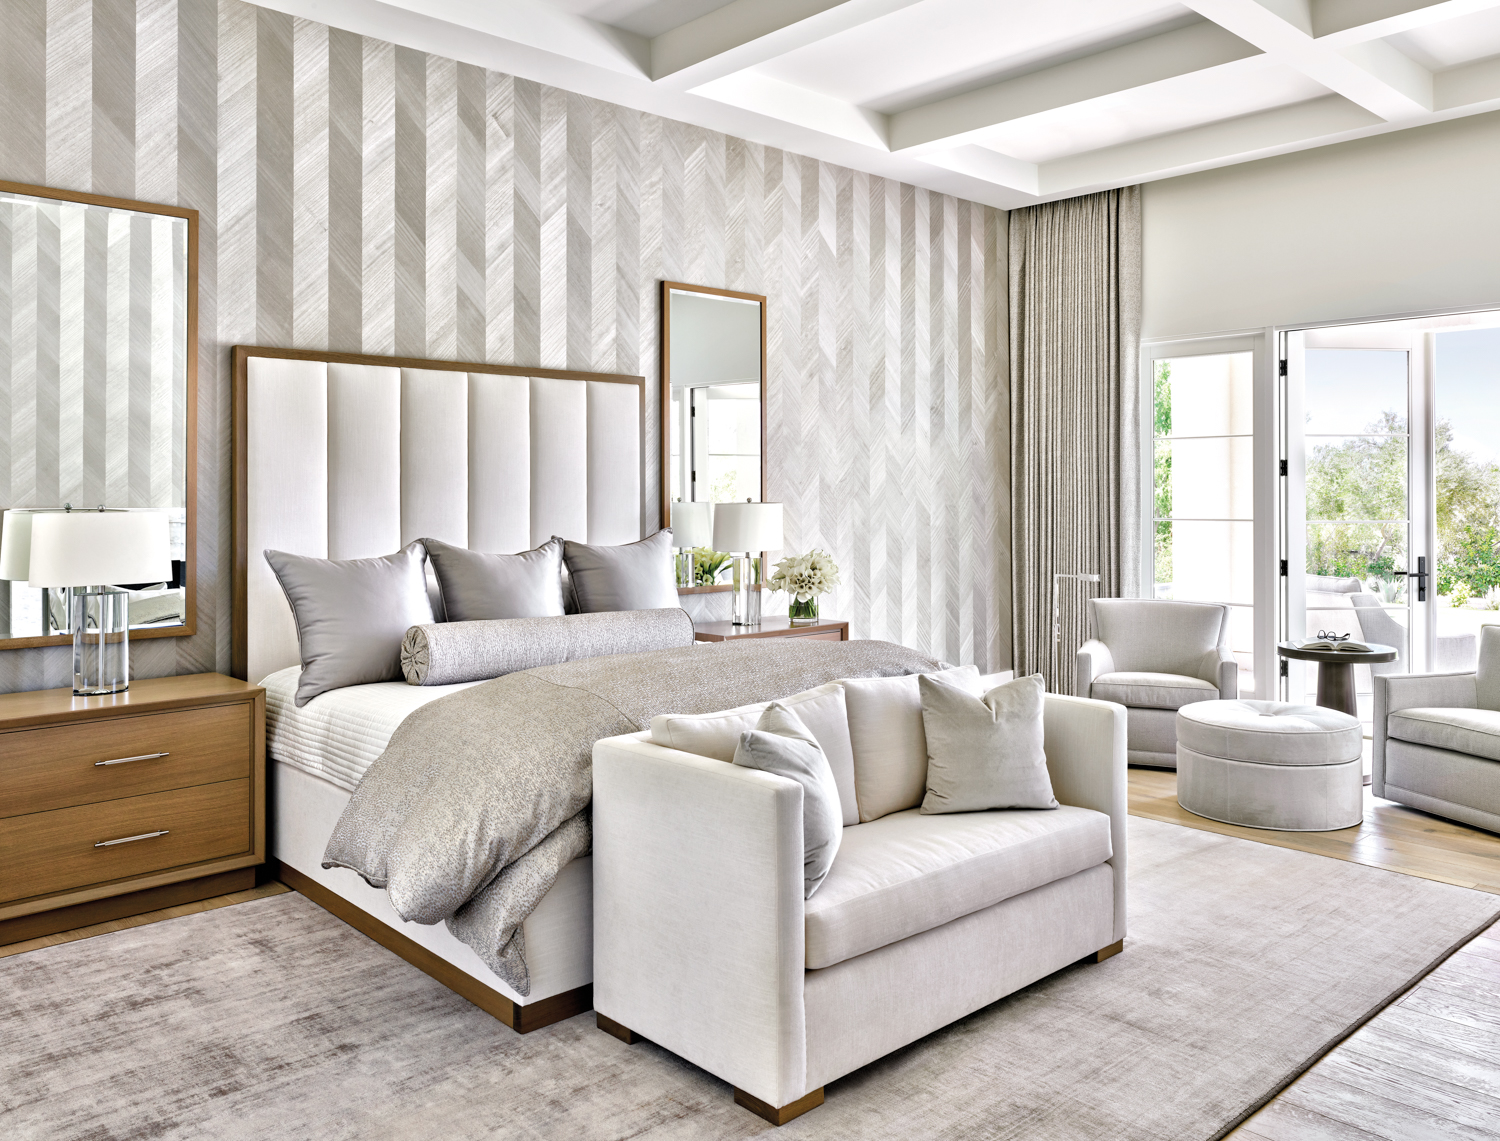 A bedroom with gray furnishings...